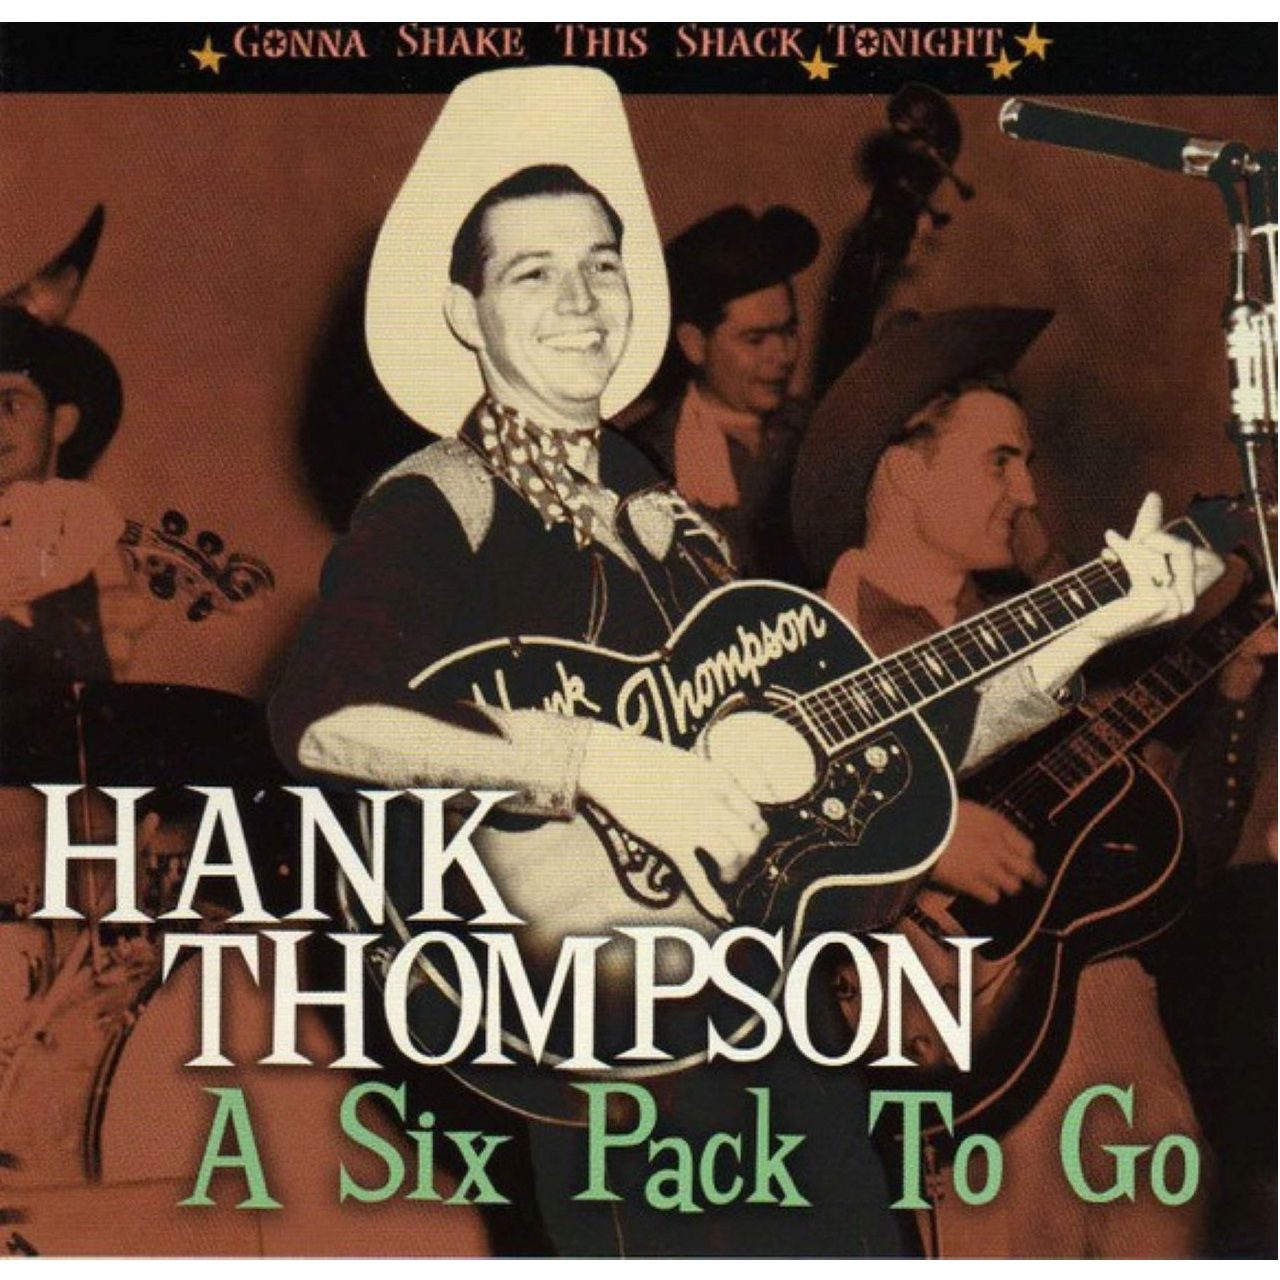 Hank Thompson - A Six Pack To Go cover album